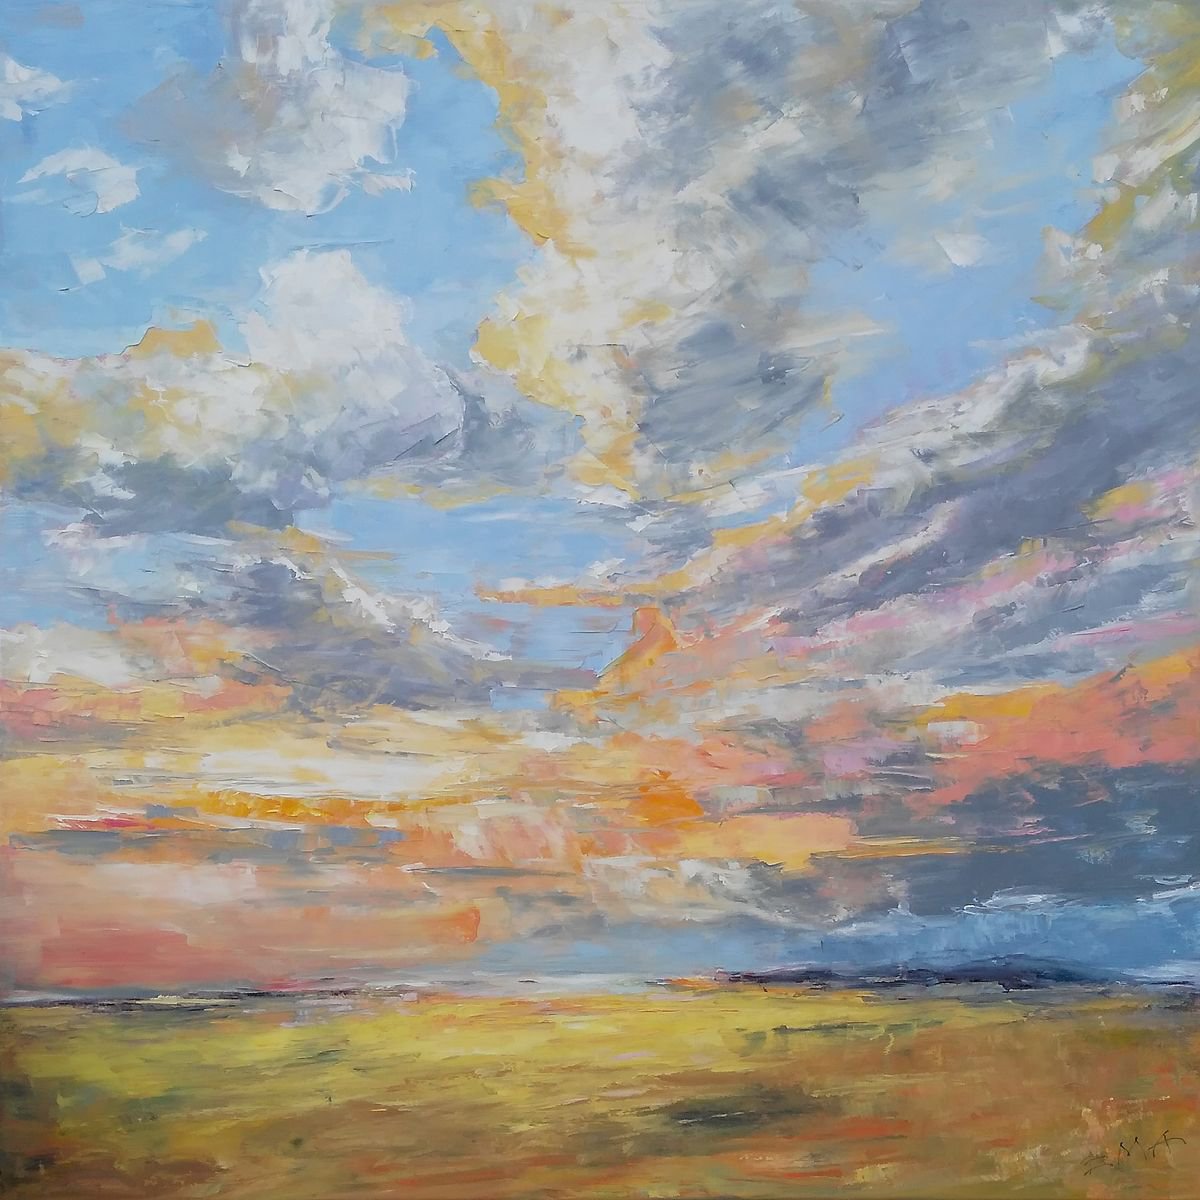 PROMISE ME INFINITY, 80x80cm, dramatic skies daylight summer clouds landscape by Emilia Milcheva